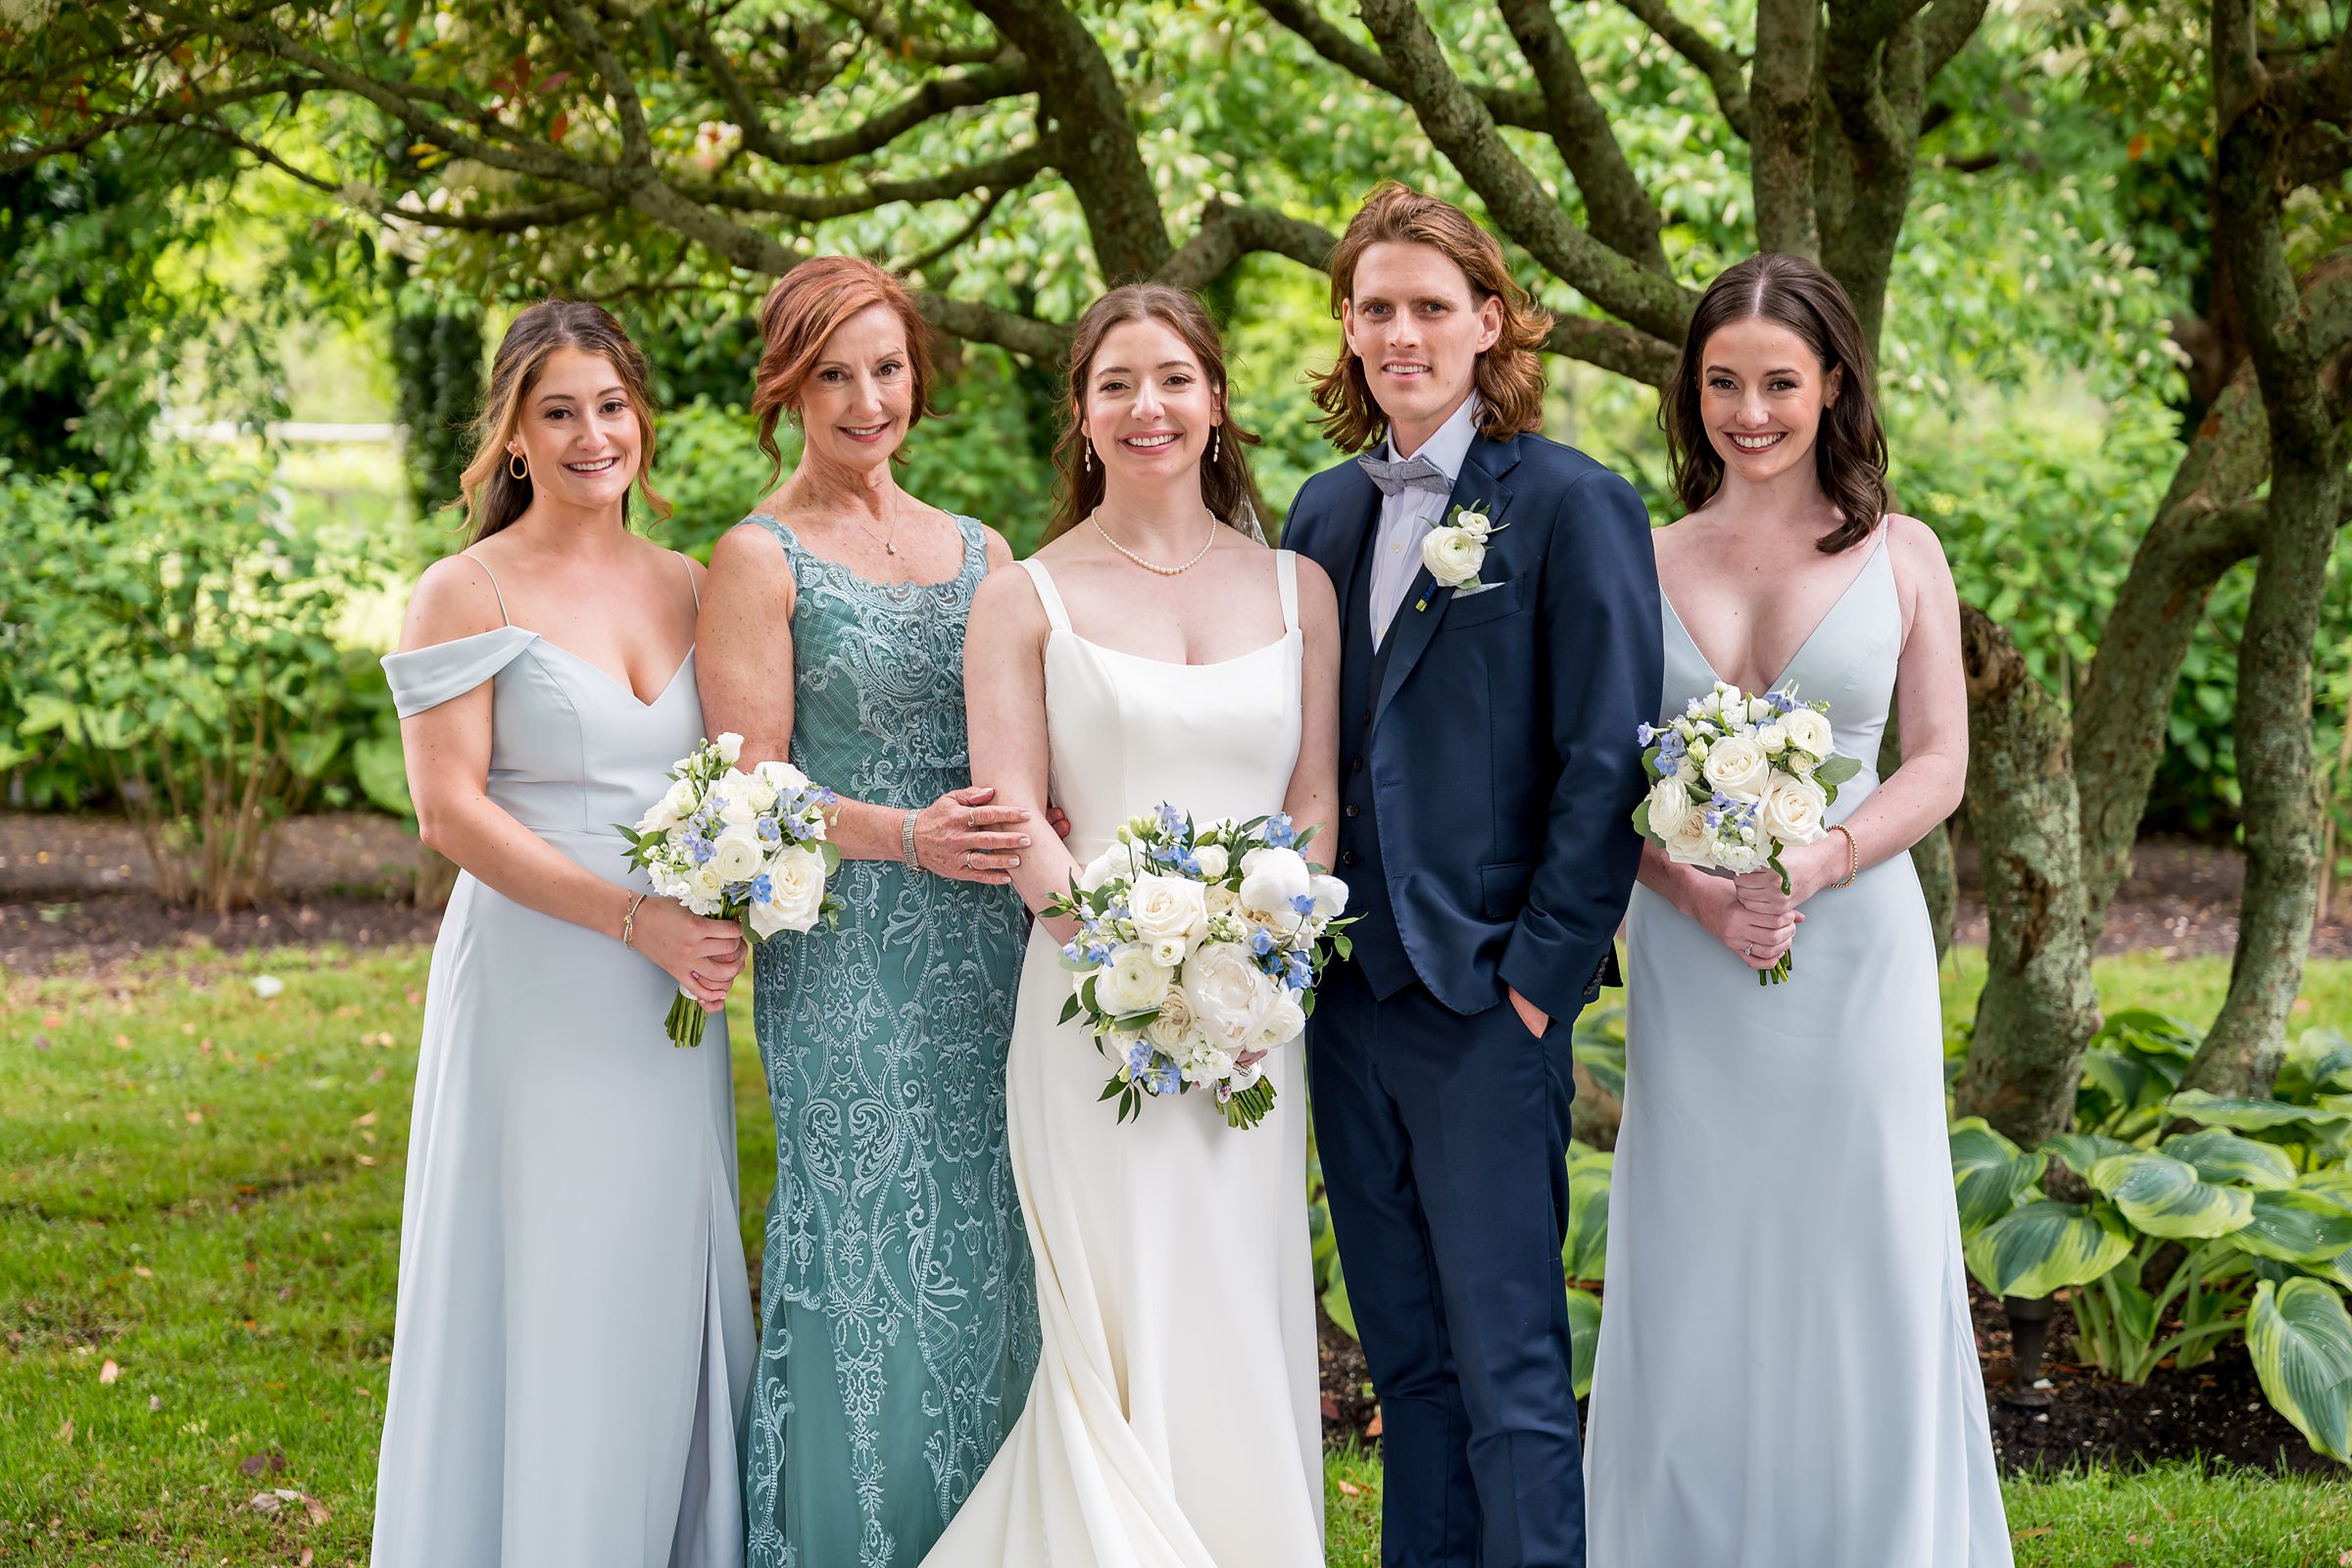 A group of five people, dressed in formal attire, are standing outdoors. Three women in light blue dresses and one man in a suit flank a woman in a white wedding dress holding a bouquet.